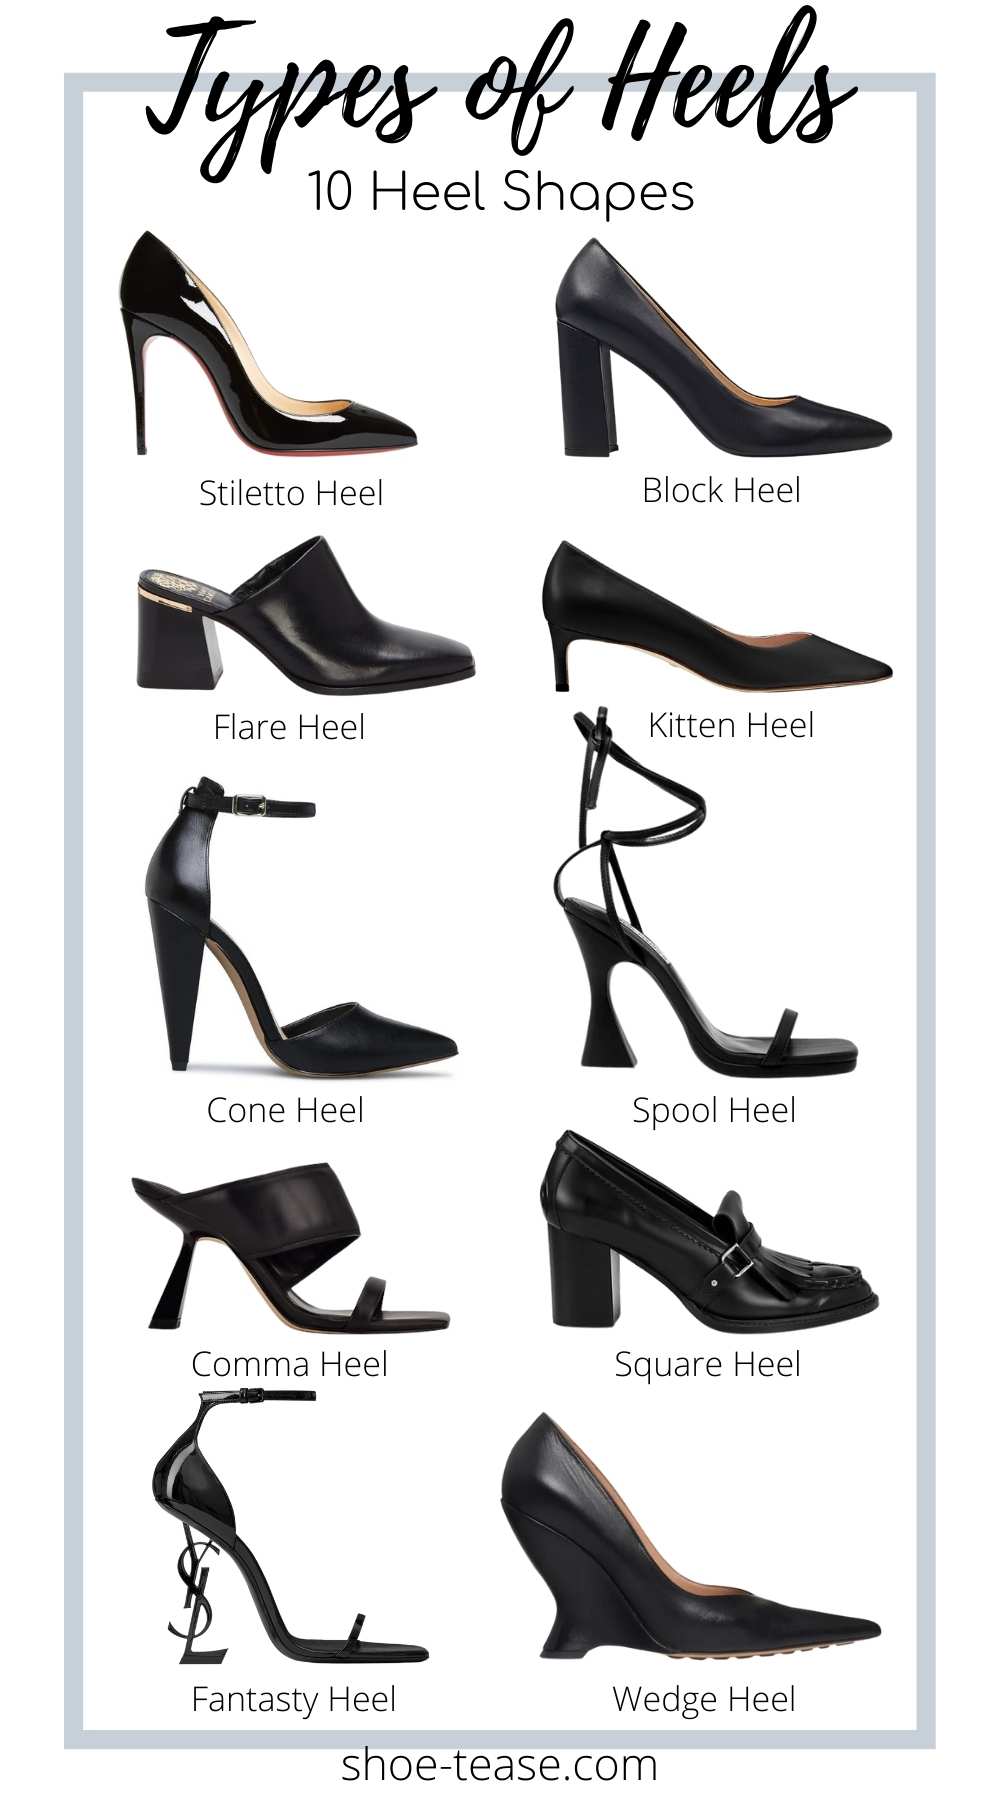 Collage of 10 different types of high heel shapes.